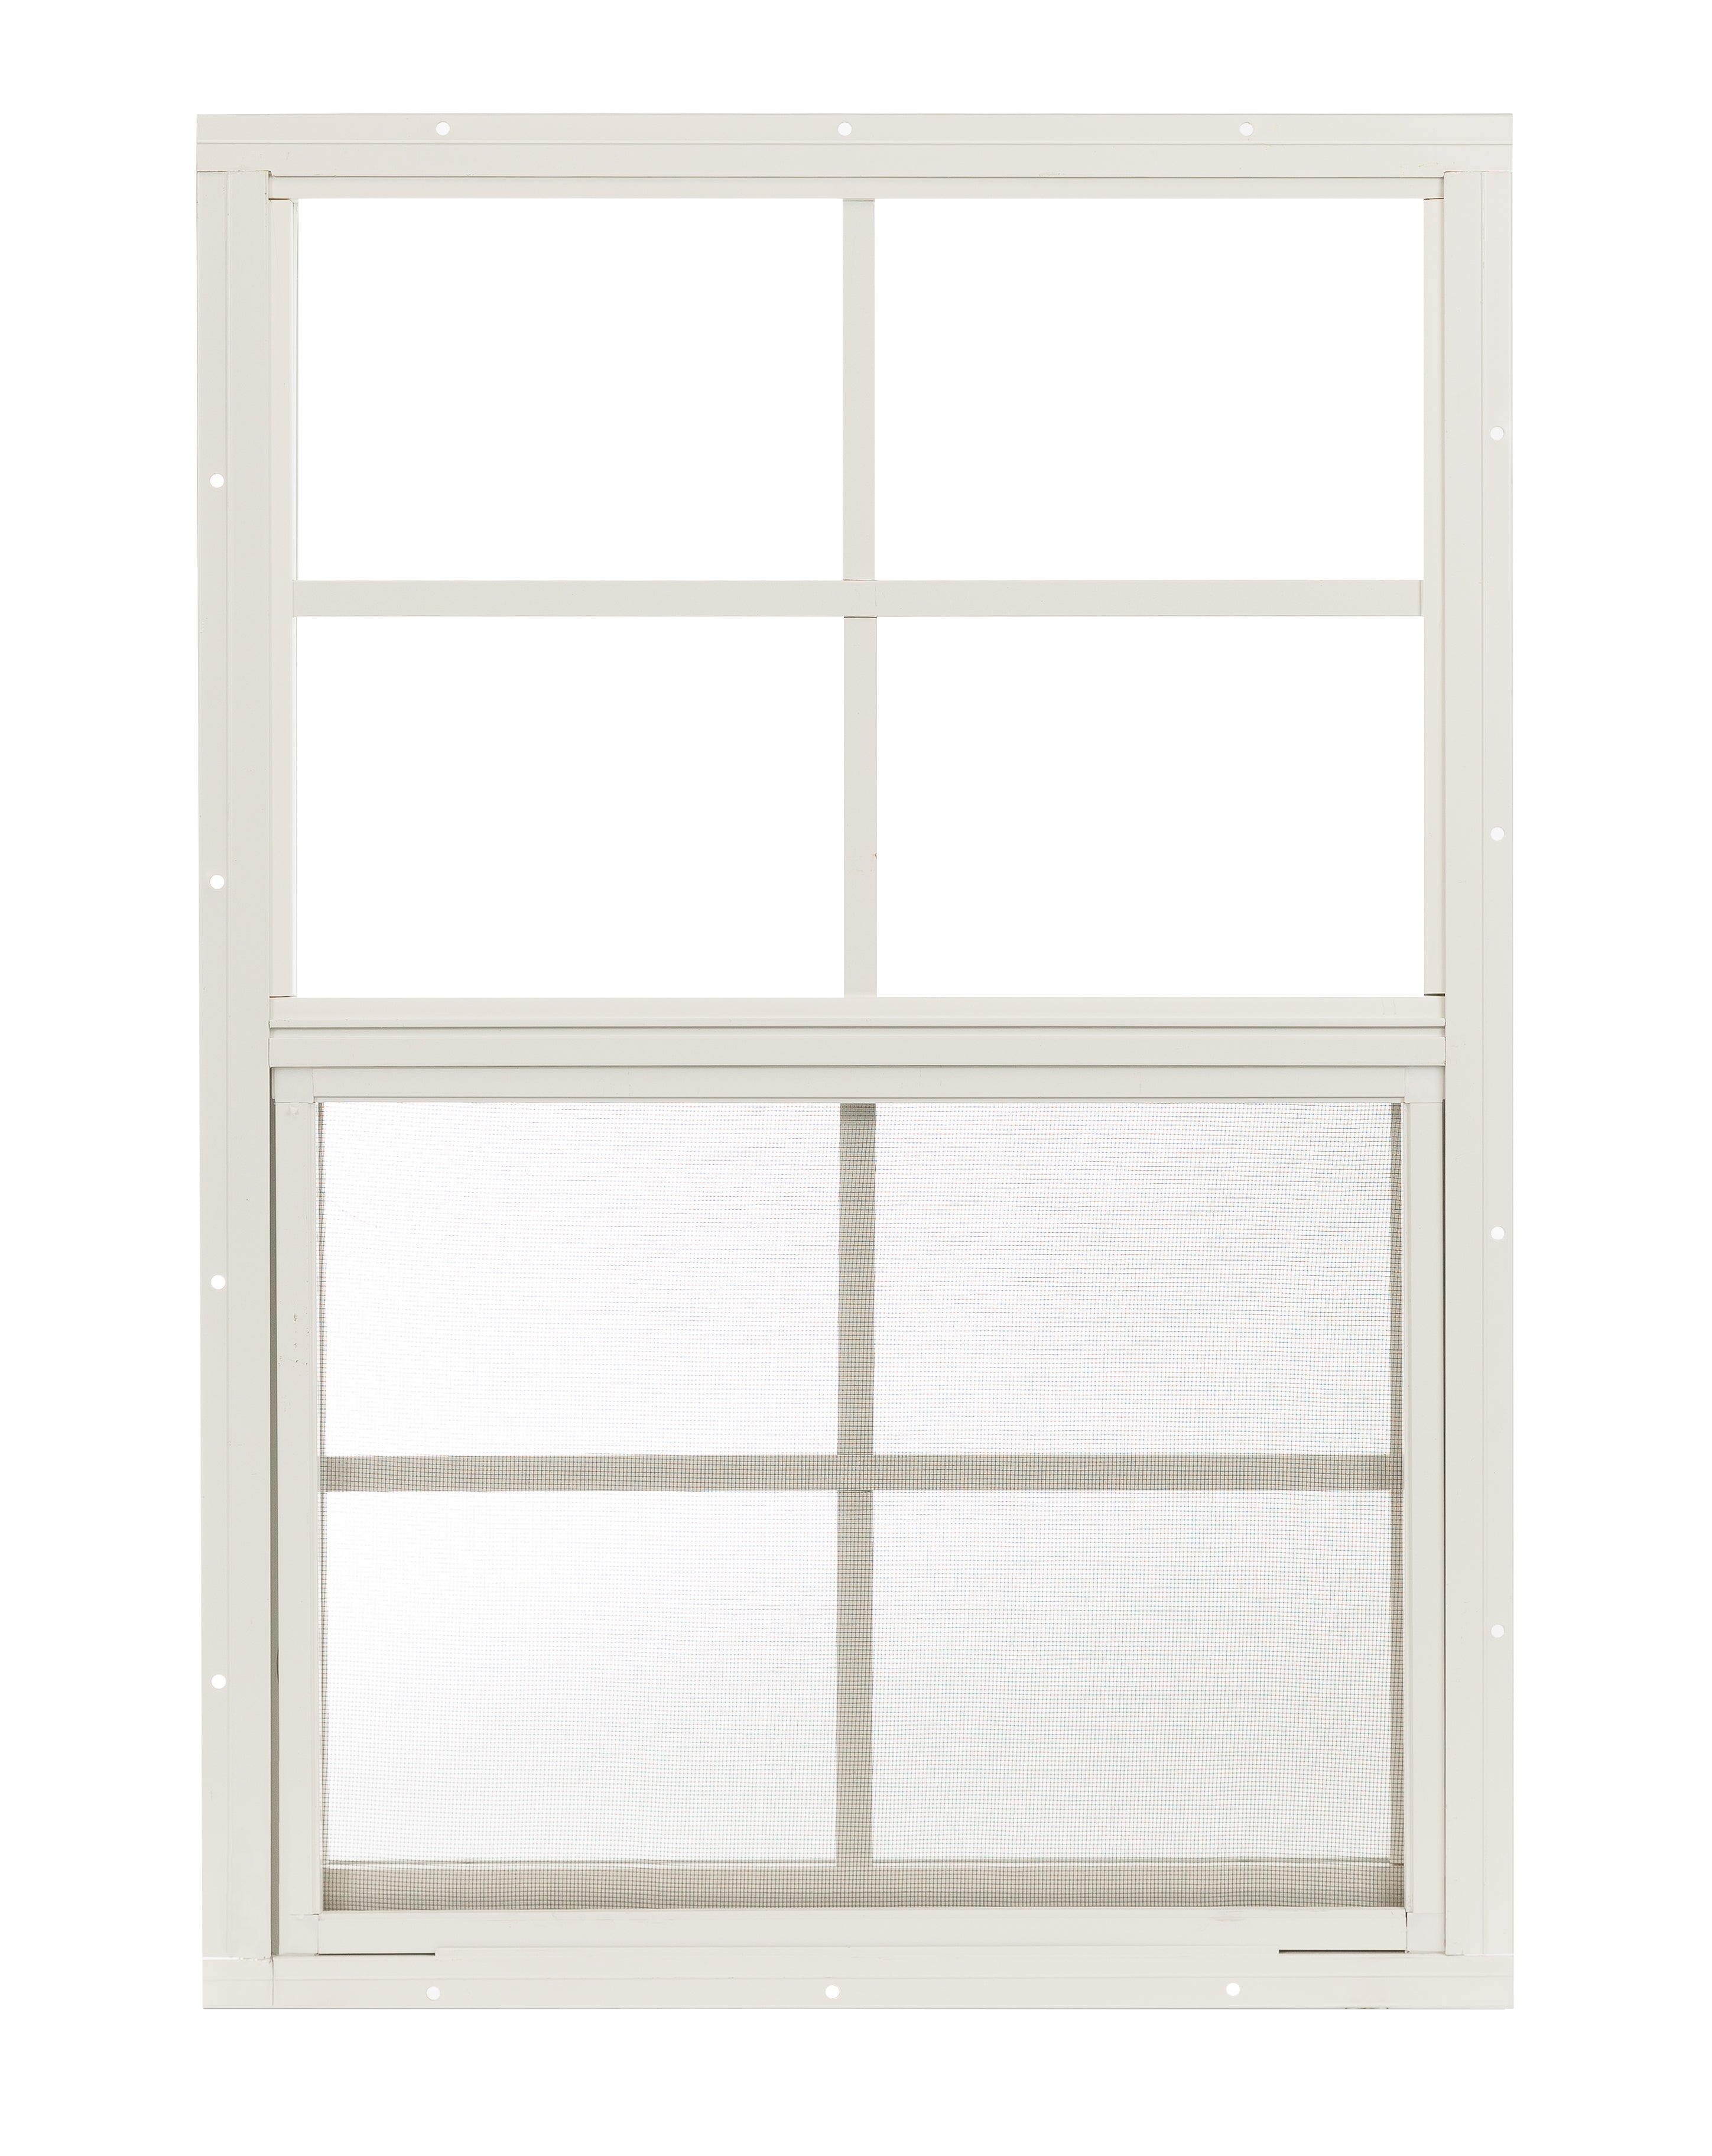 18" W x 27" H Single Hung Flush Mount White Window for Sheds, Playhouses, and MORE